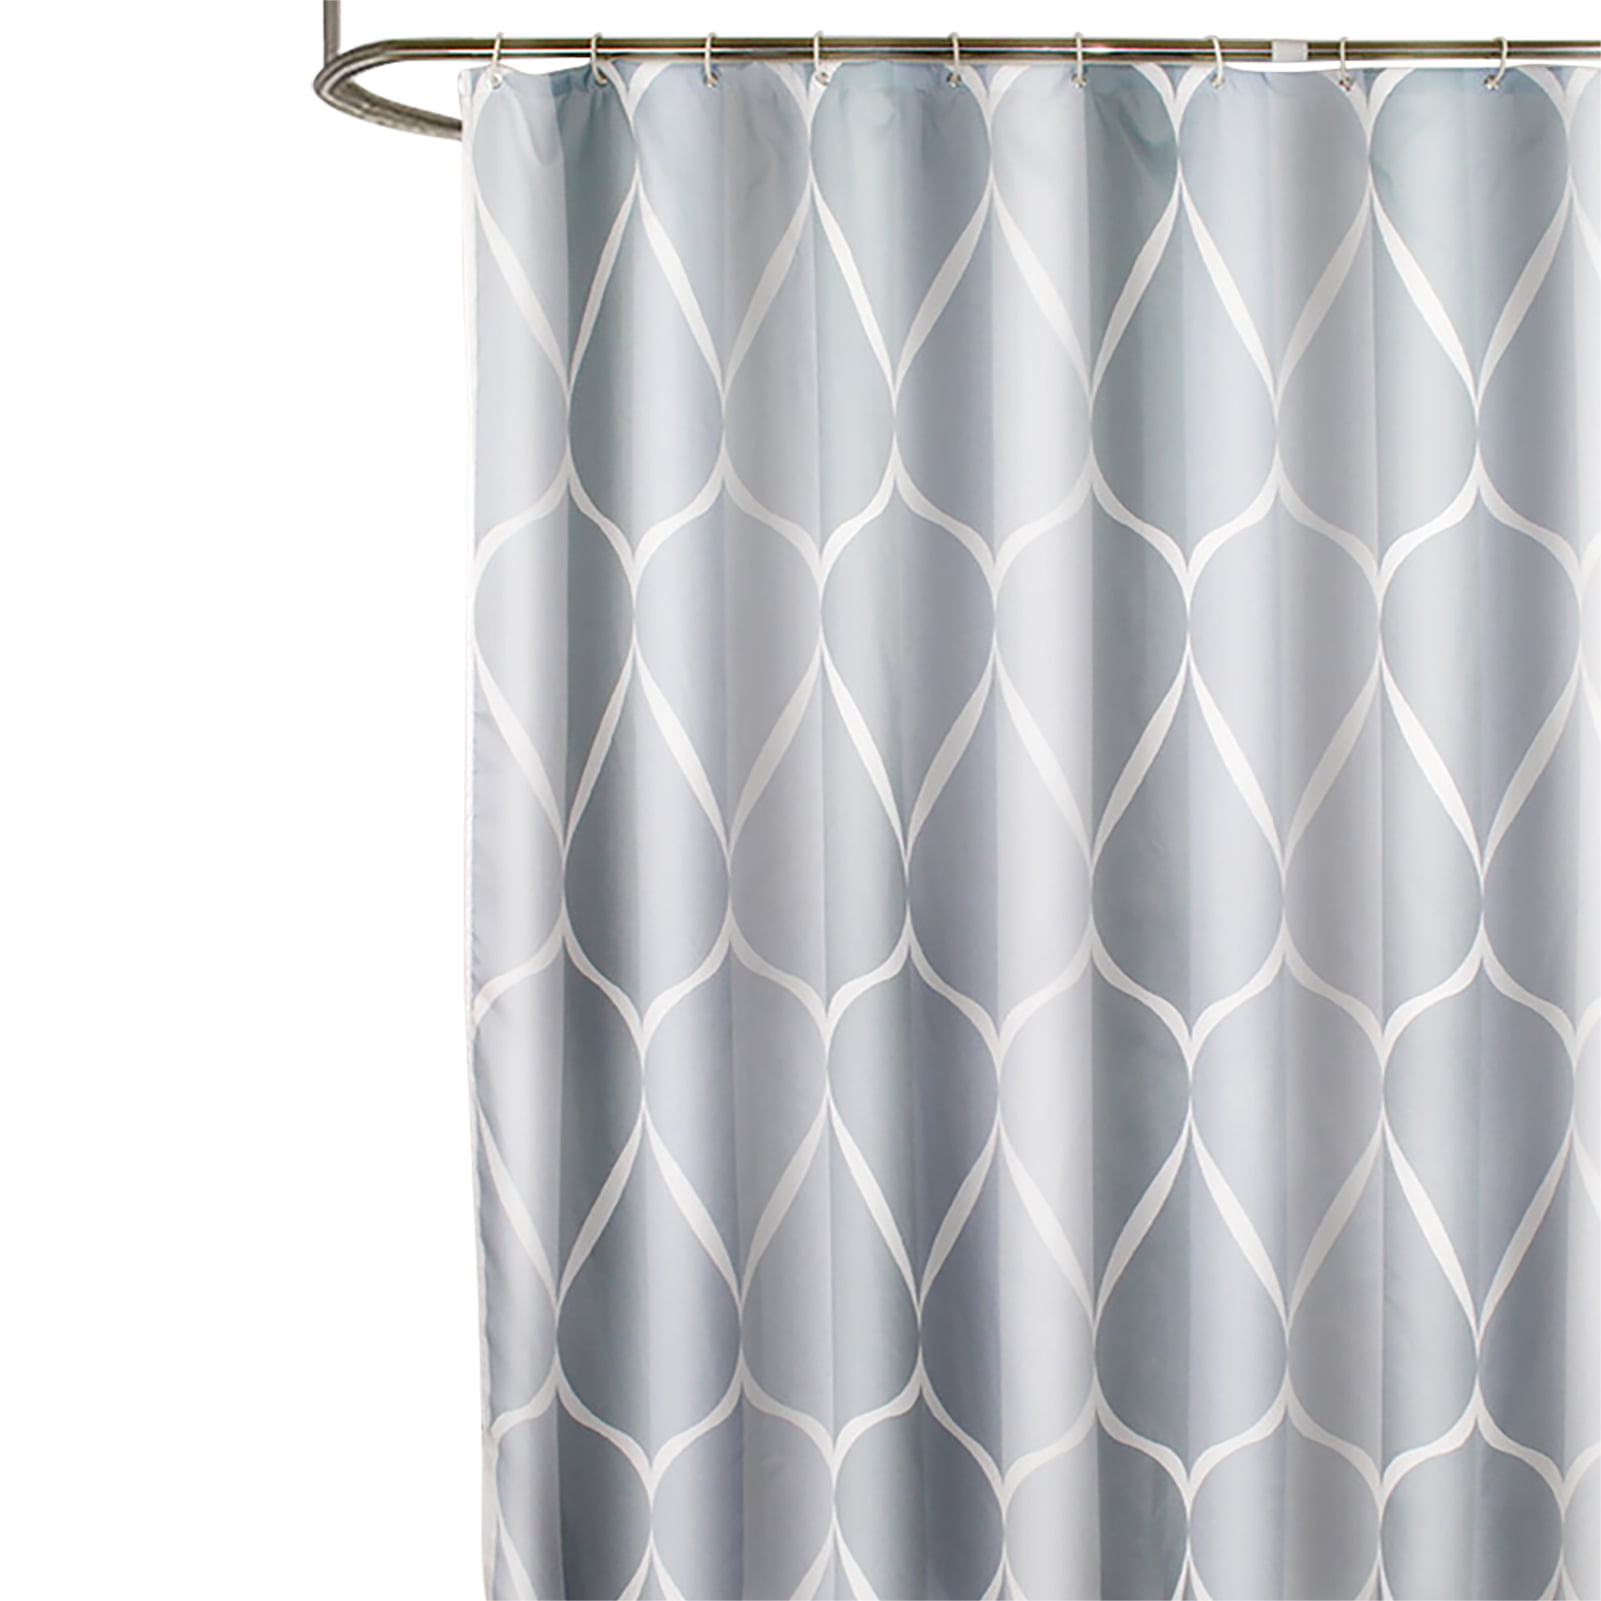 EXTRA LONG FABRIC SHOWER CURTAIN WATERPROOF WITH HOOKS WEIGHTED HEM 180CM 